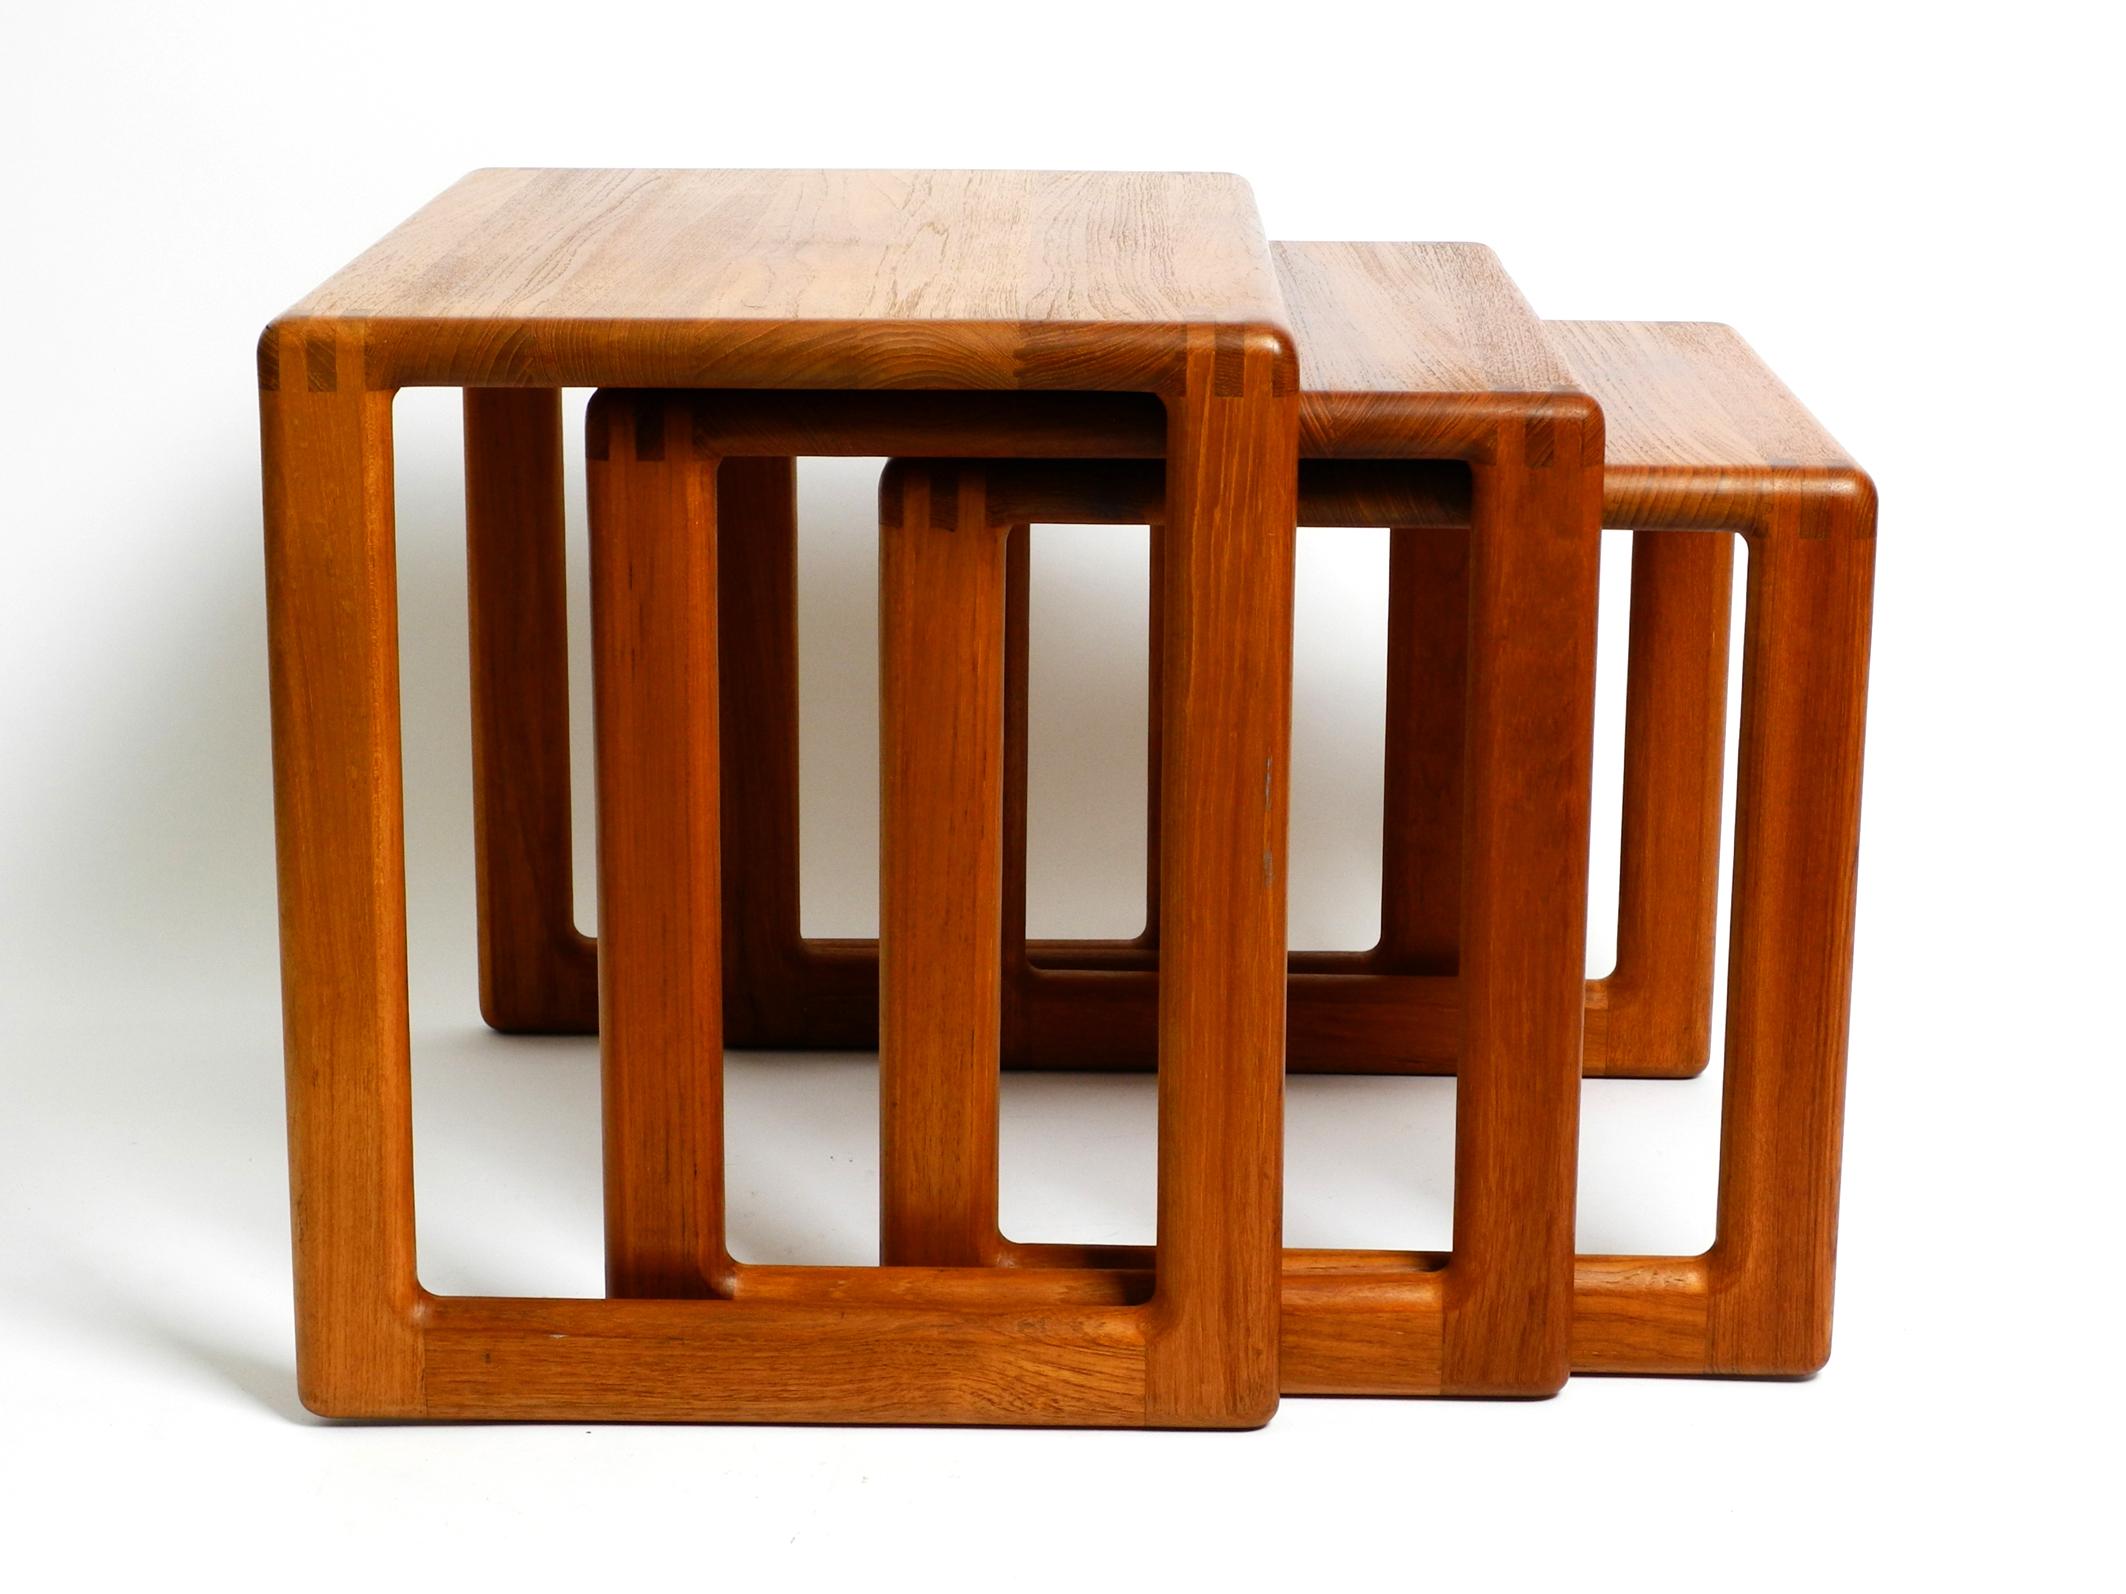 Original 60's solid teak 3 piece nesting set. 
Scandinavian production. Without manufacturer's label.
Beautiful minimalist design. Very good workmanship. Built to last.
The edges are joint by mortise and tenon and glue. Nothing screwed. Looks very